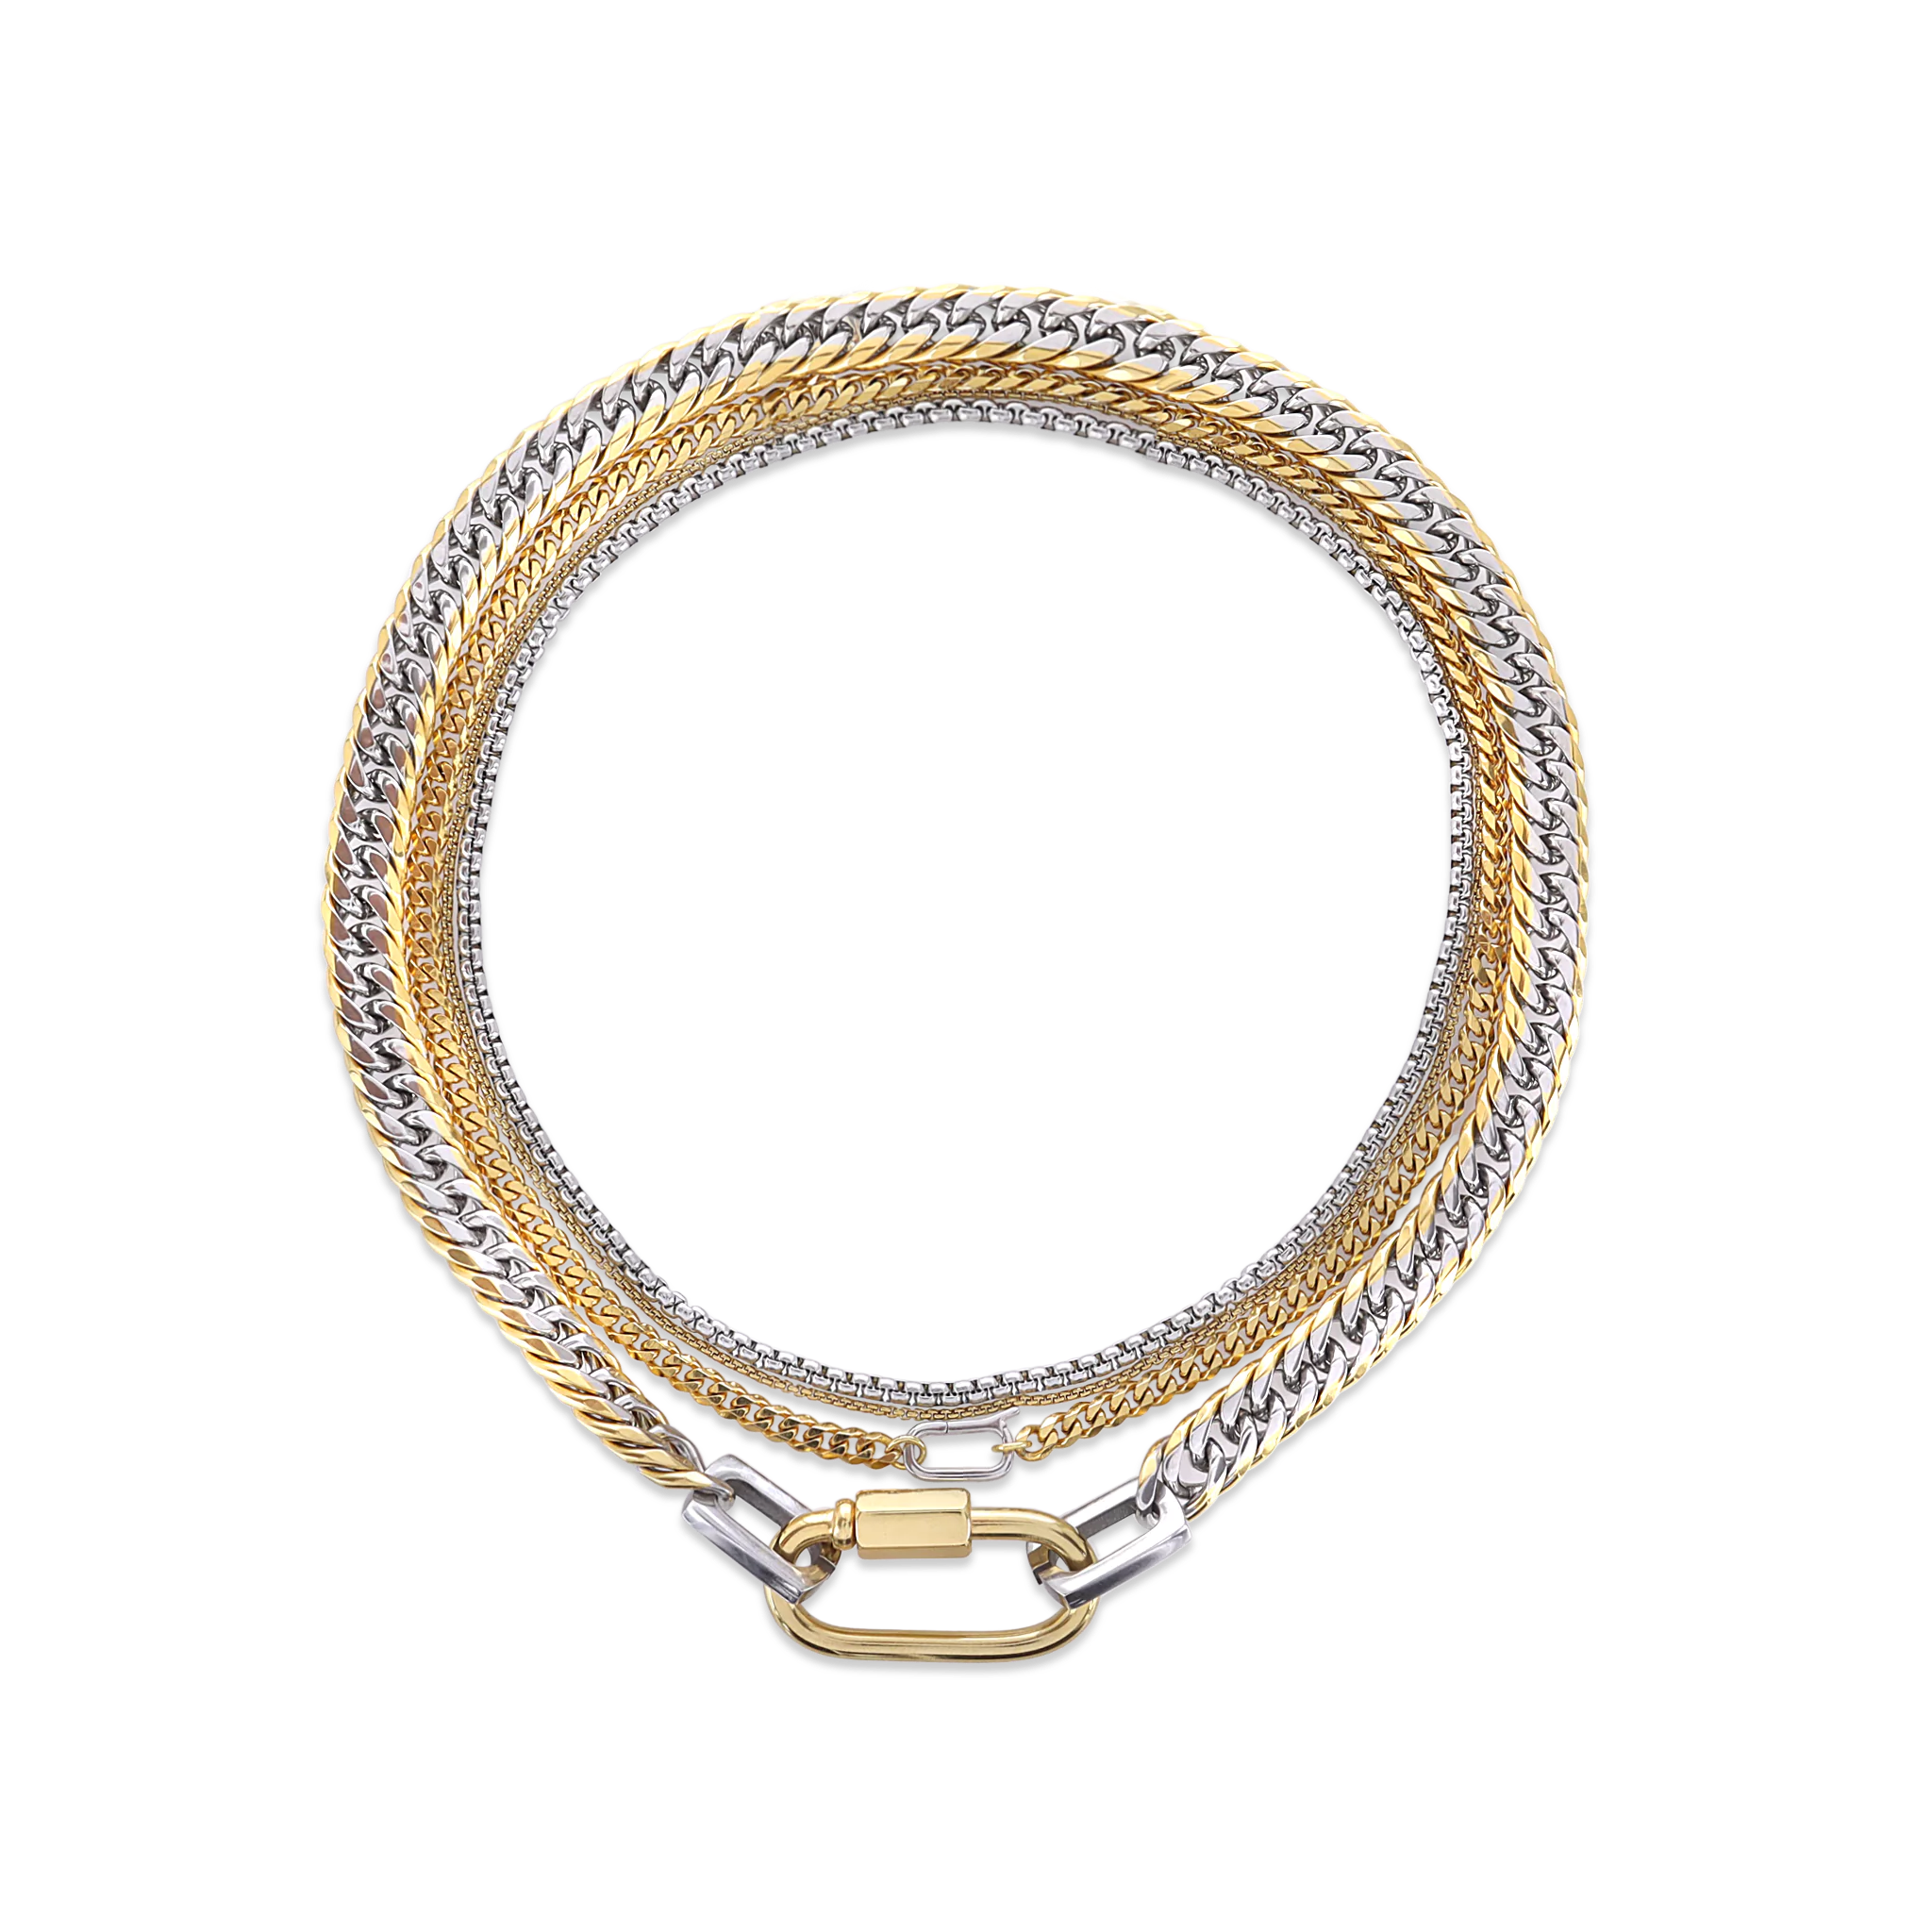 3 Layer Carabiner Clasp Gold Necklace